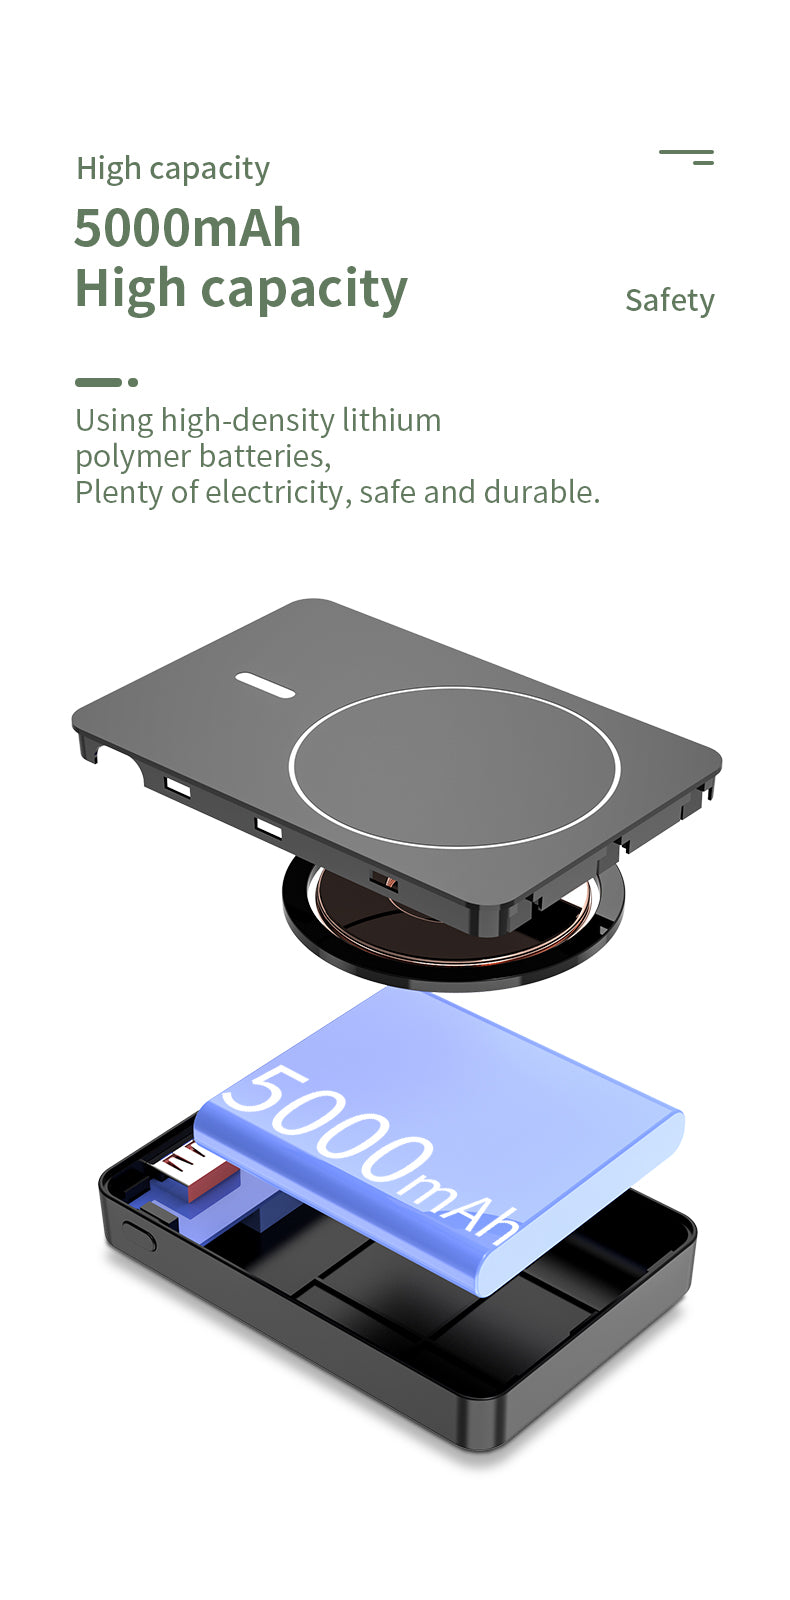 Portable 5000mah 15W Fast wireless Charging Magnetic Power Bank  976